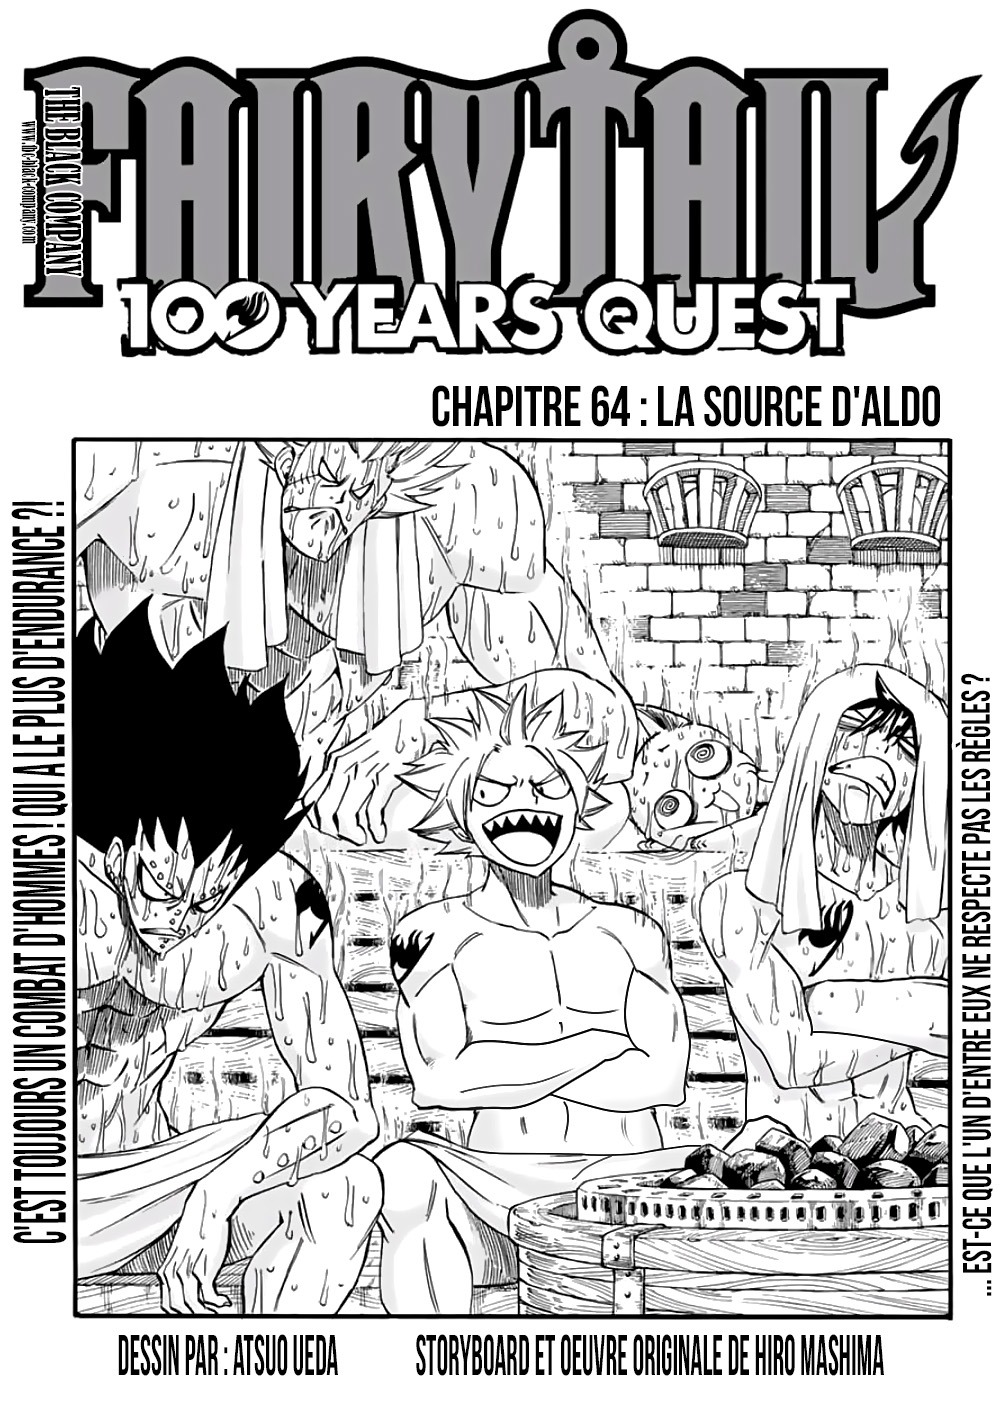 Fairy Tail 100 Years Quest: Chapter chapitre-64 - Page 1